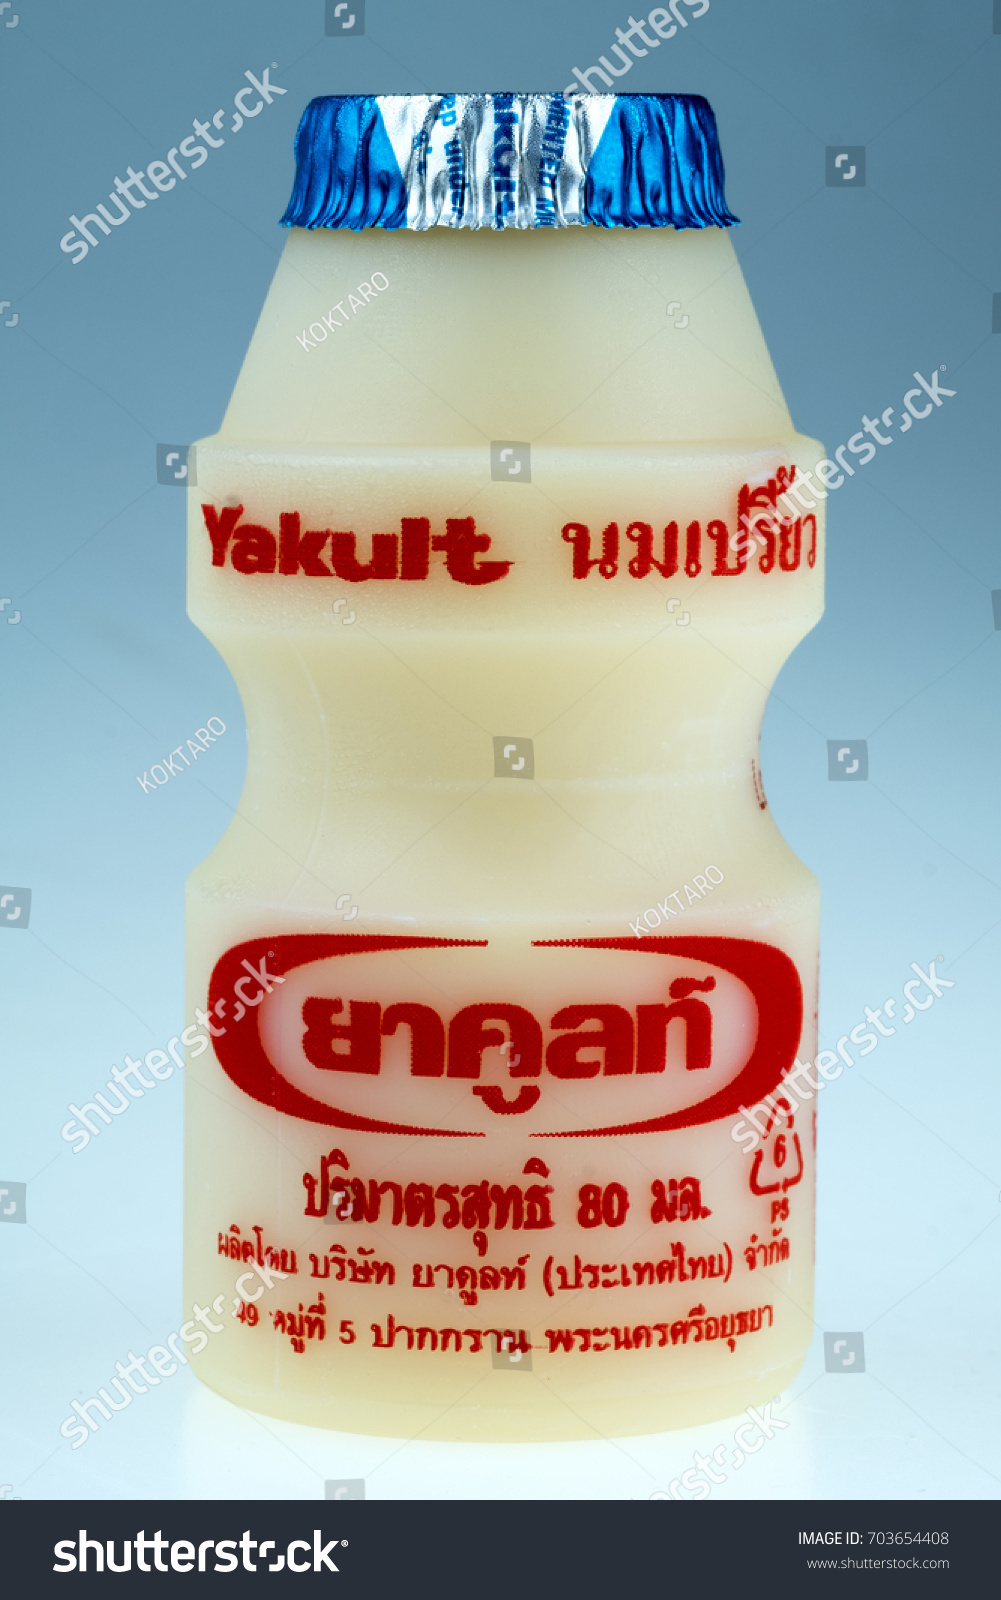 Made from yakult Why Yakult